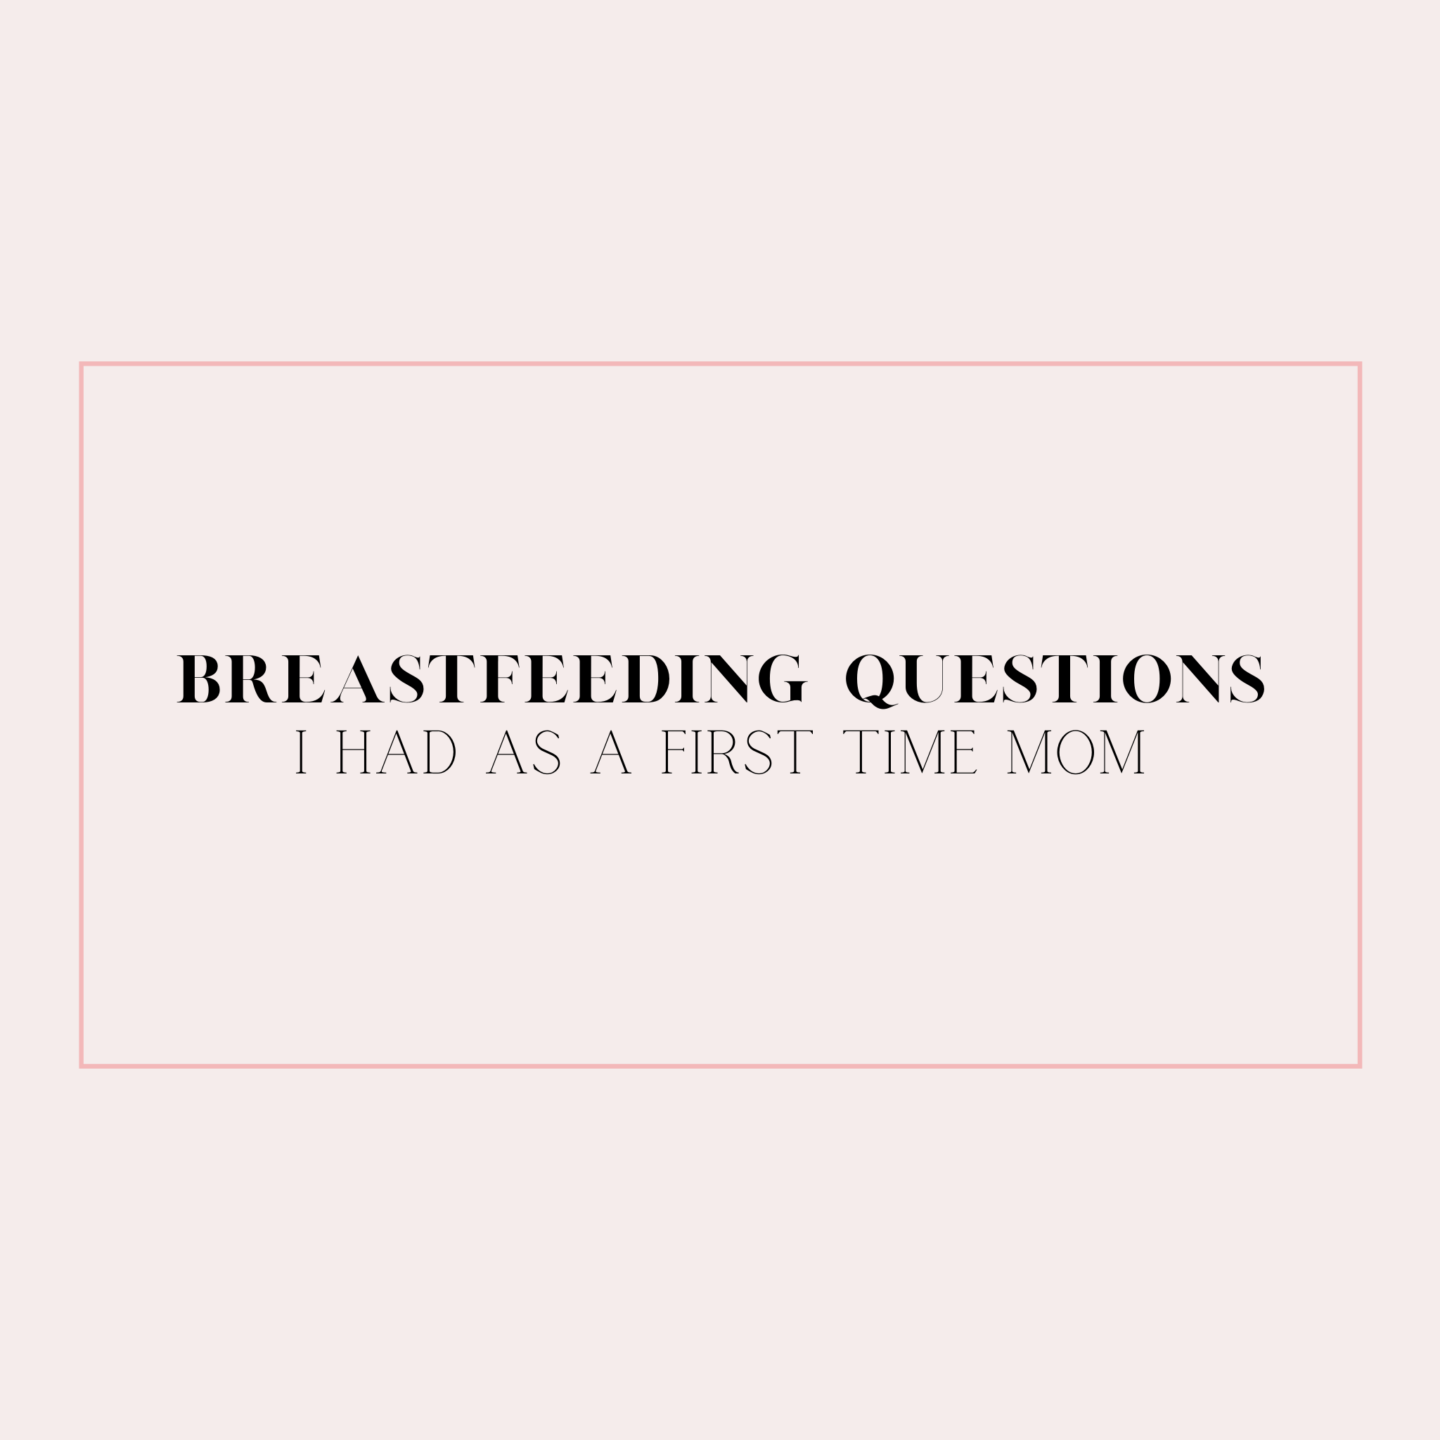 Breastfeeding Questions I Had as a First Time Mom